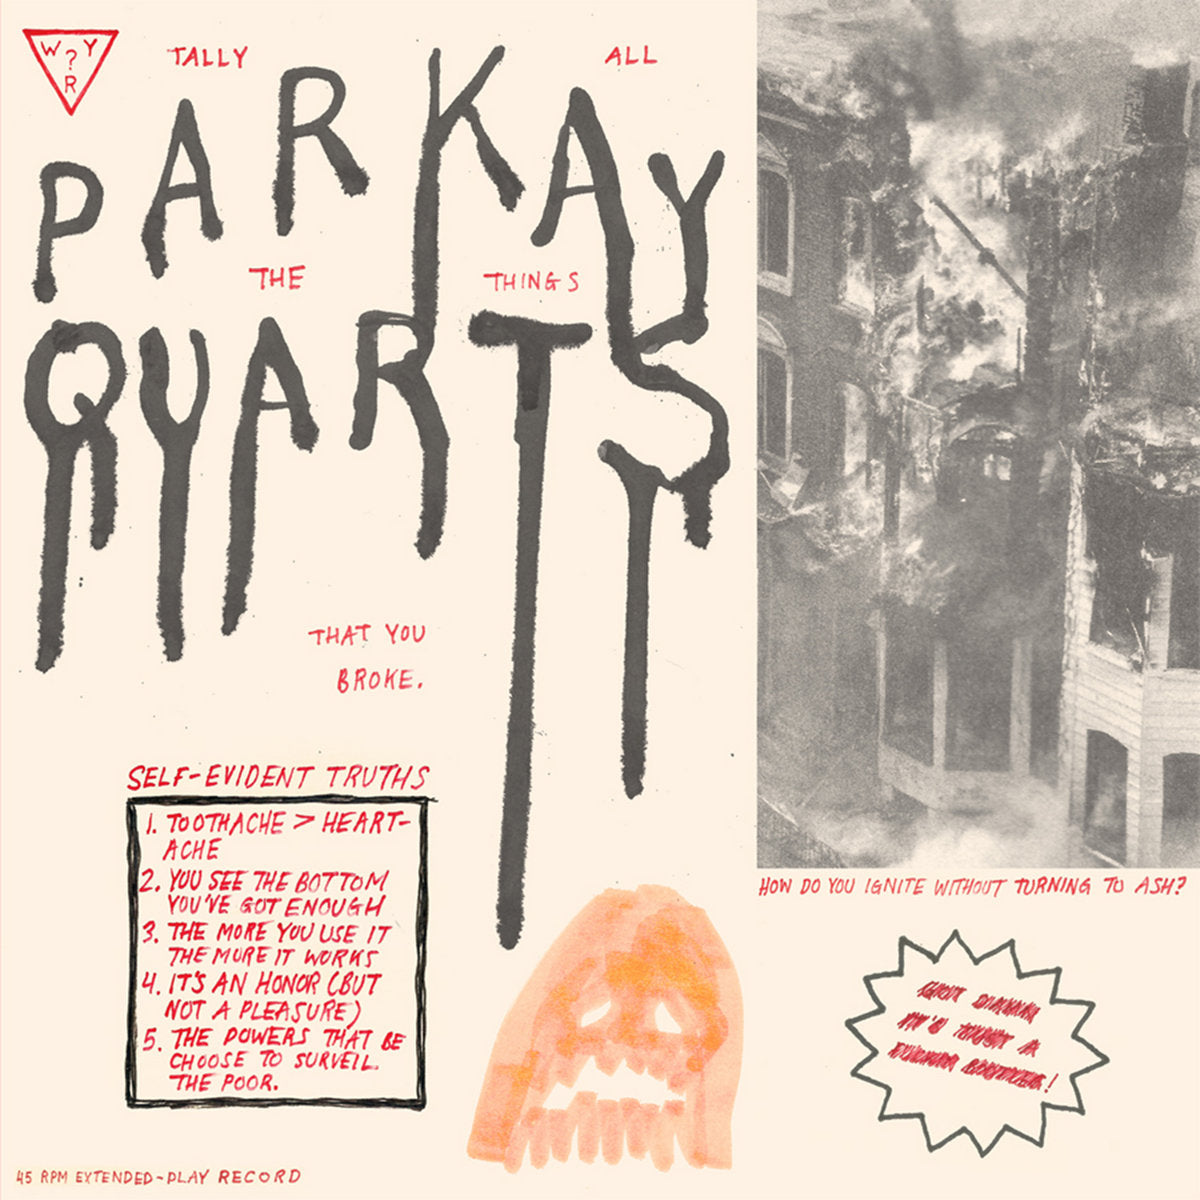 PARQUET COURTS - TALLY ALL THE THINGS THAT YOU BROKE Vinyl 12" EP